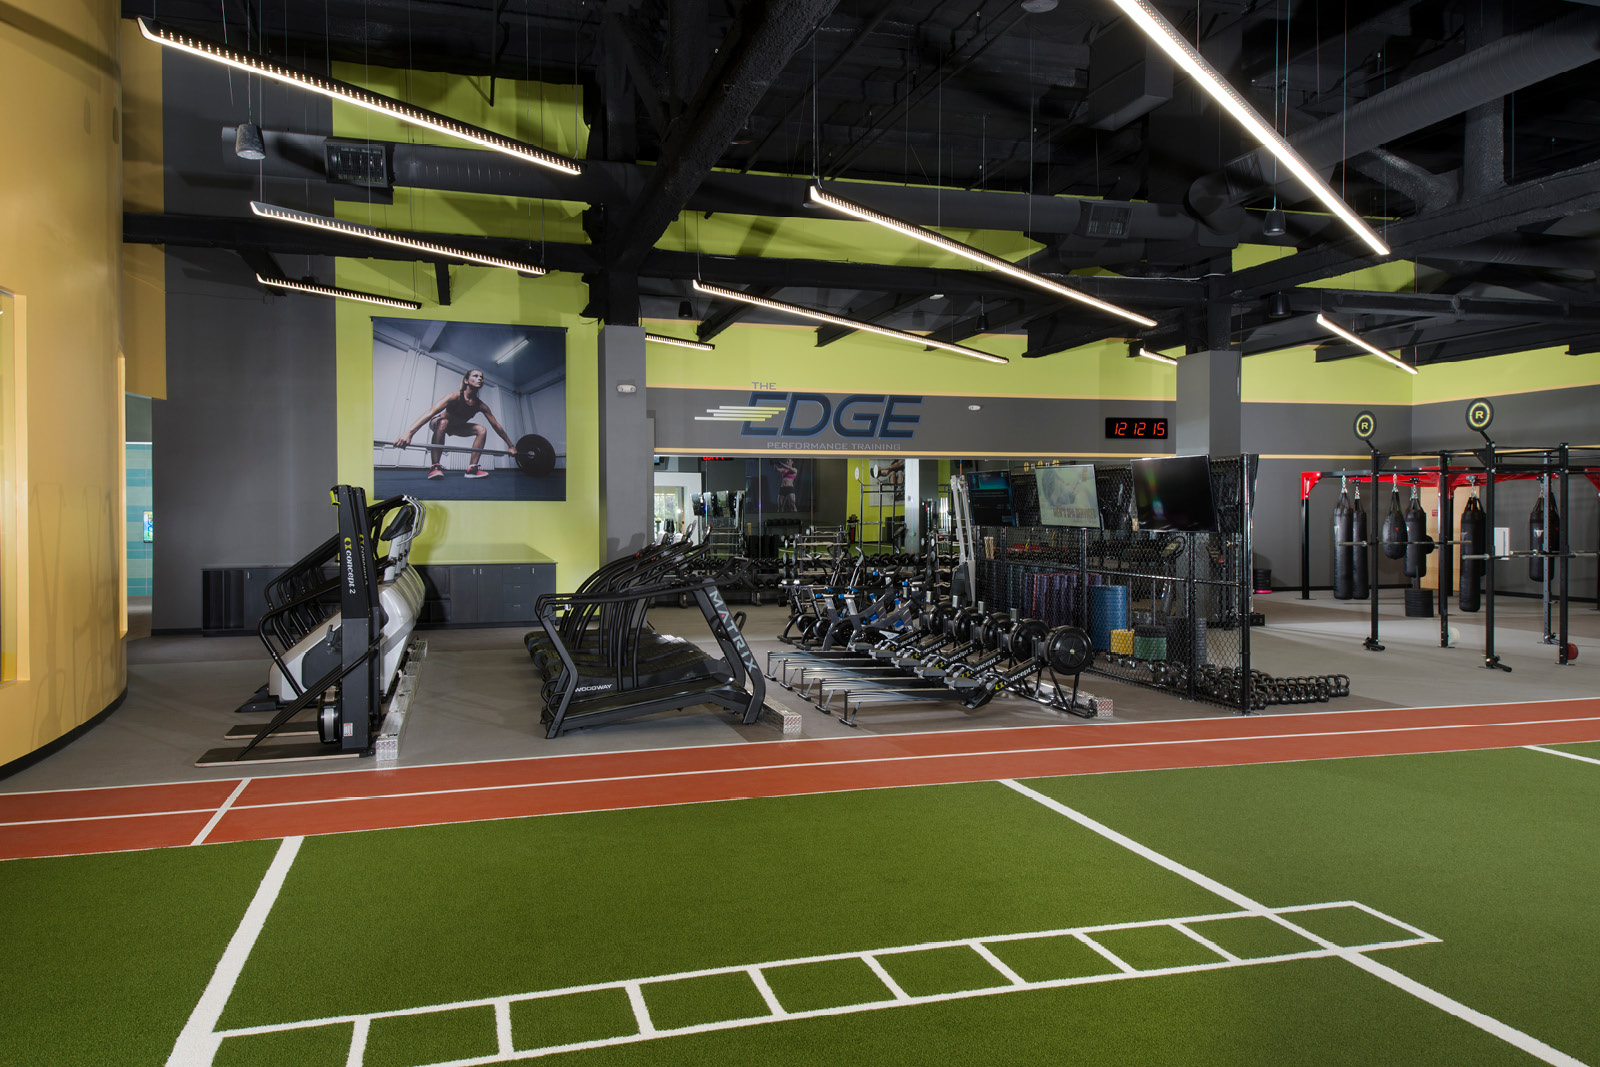 The Edge group training performance space